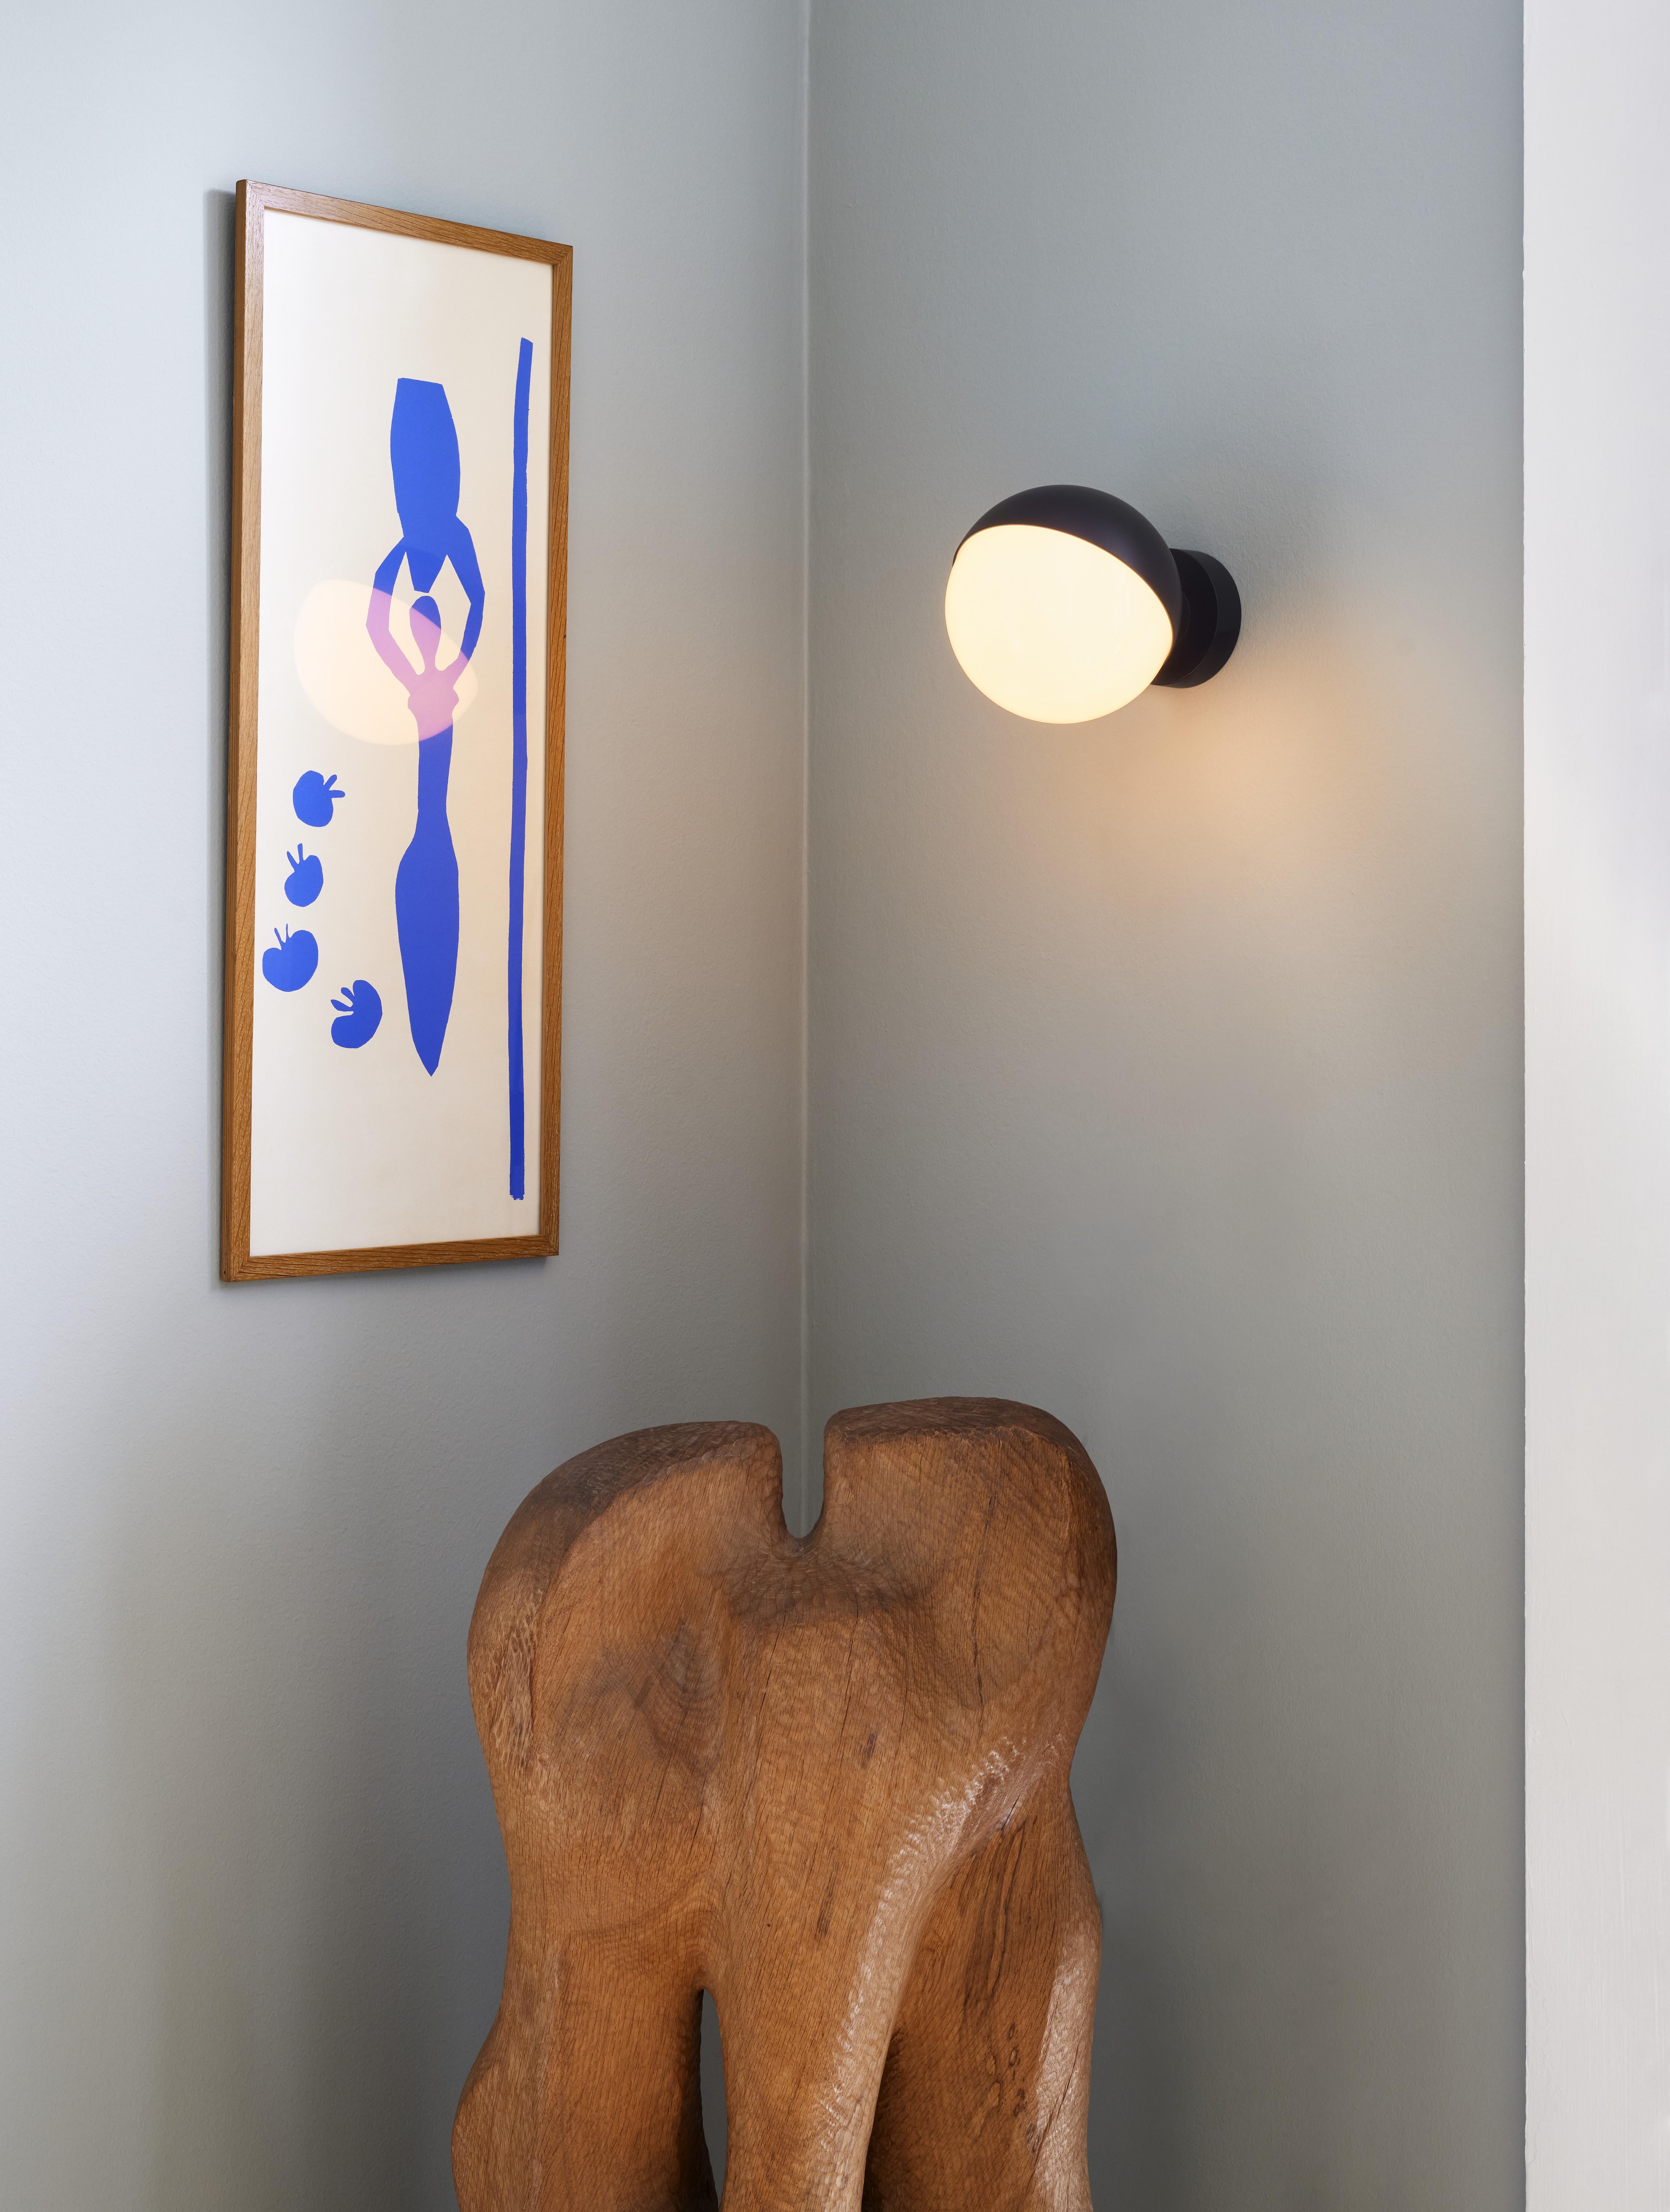 Vilhelm Lauritzen 'VL Studio' metal and glass wall lamp for Louis Poulsen.

This innovative lamp is based on Lauritzen's original studio wall lamp for Radiohuset, which indicated with a red or green light whether the studio was recording. This